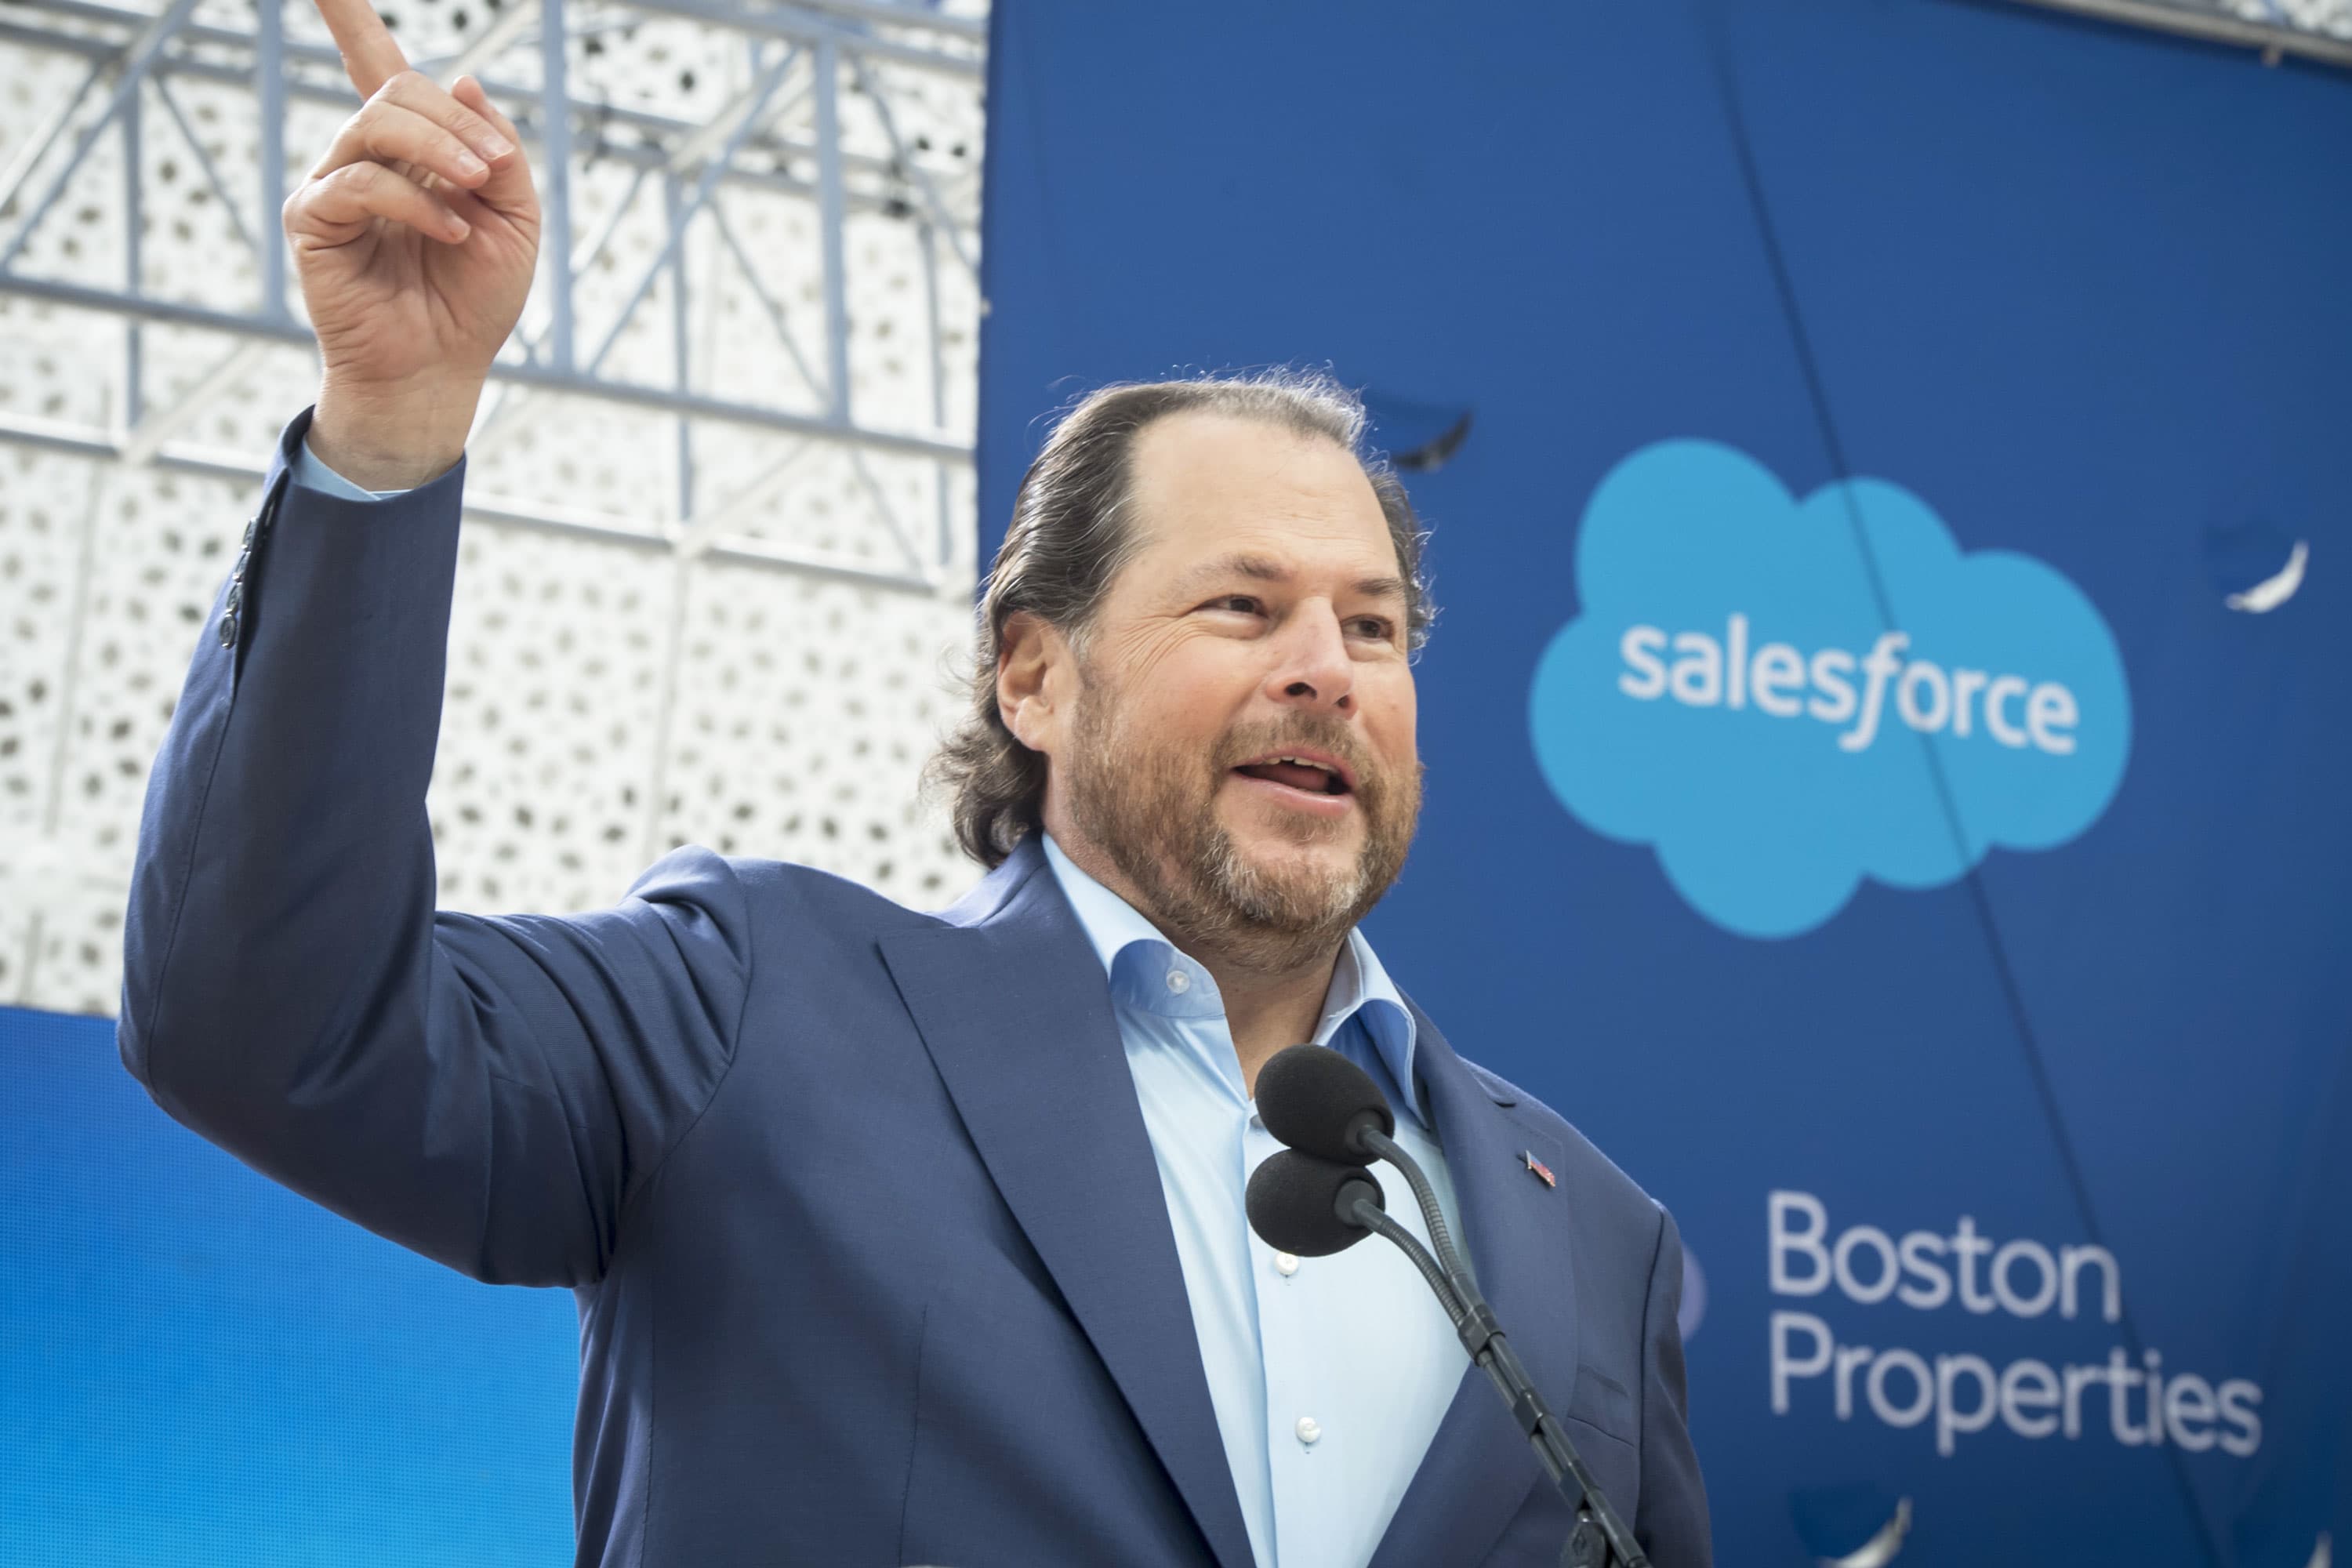 Salesforce revenue up 20% from last year, forecast calls for similar growth rate